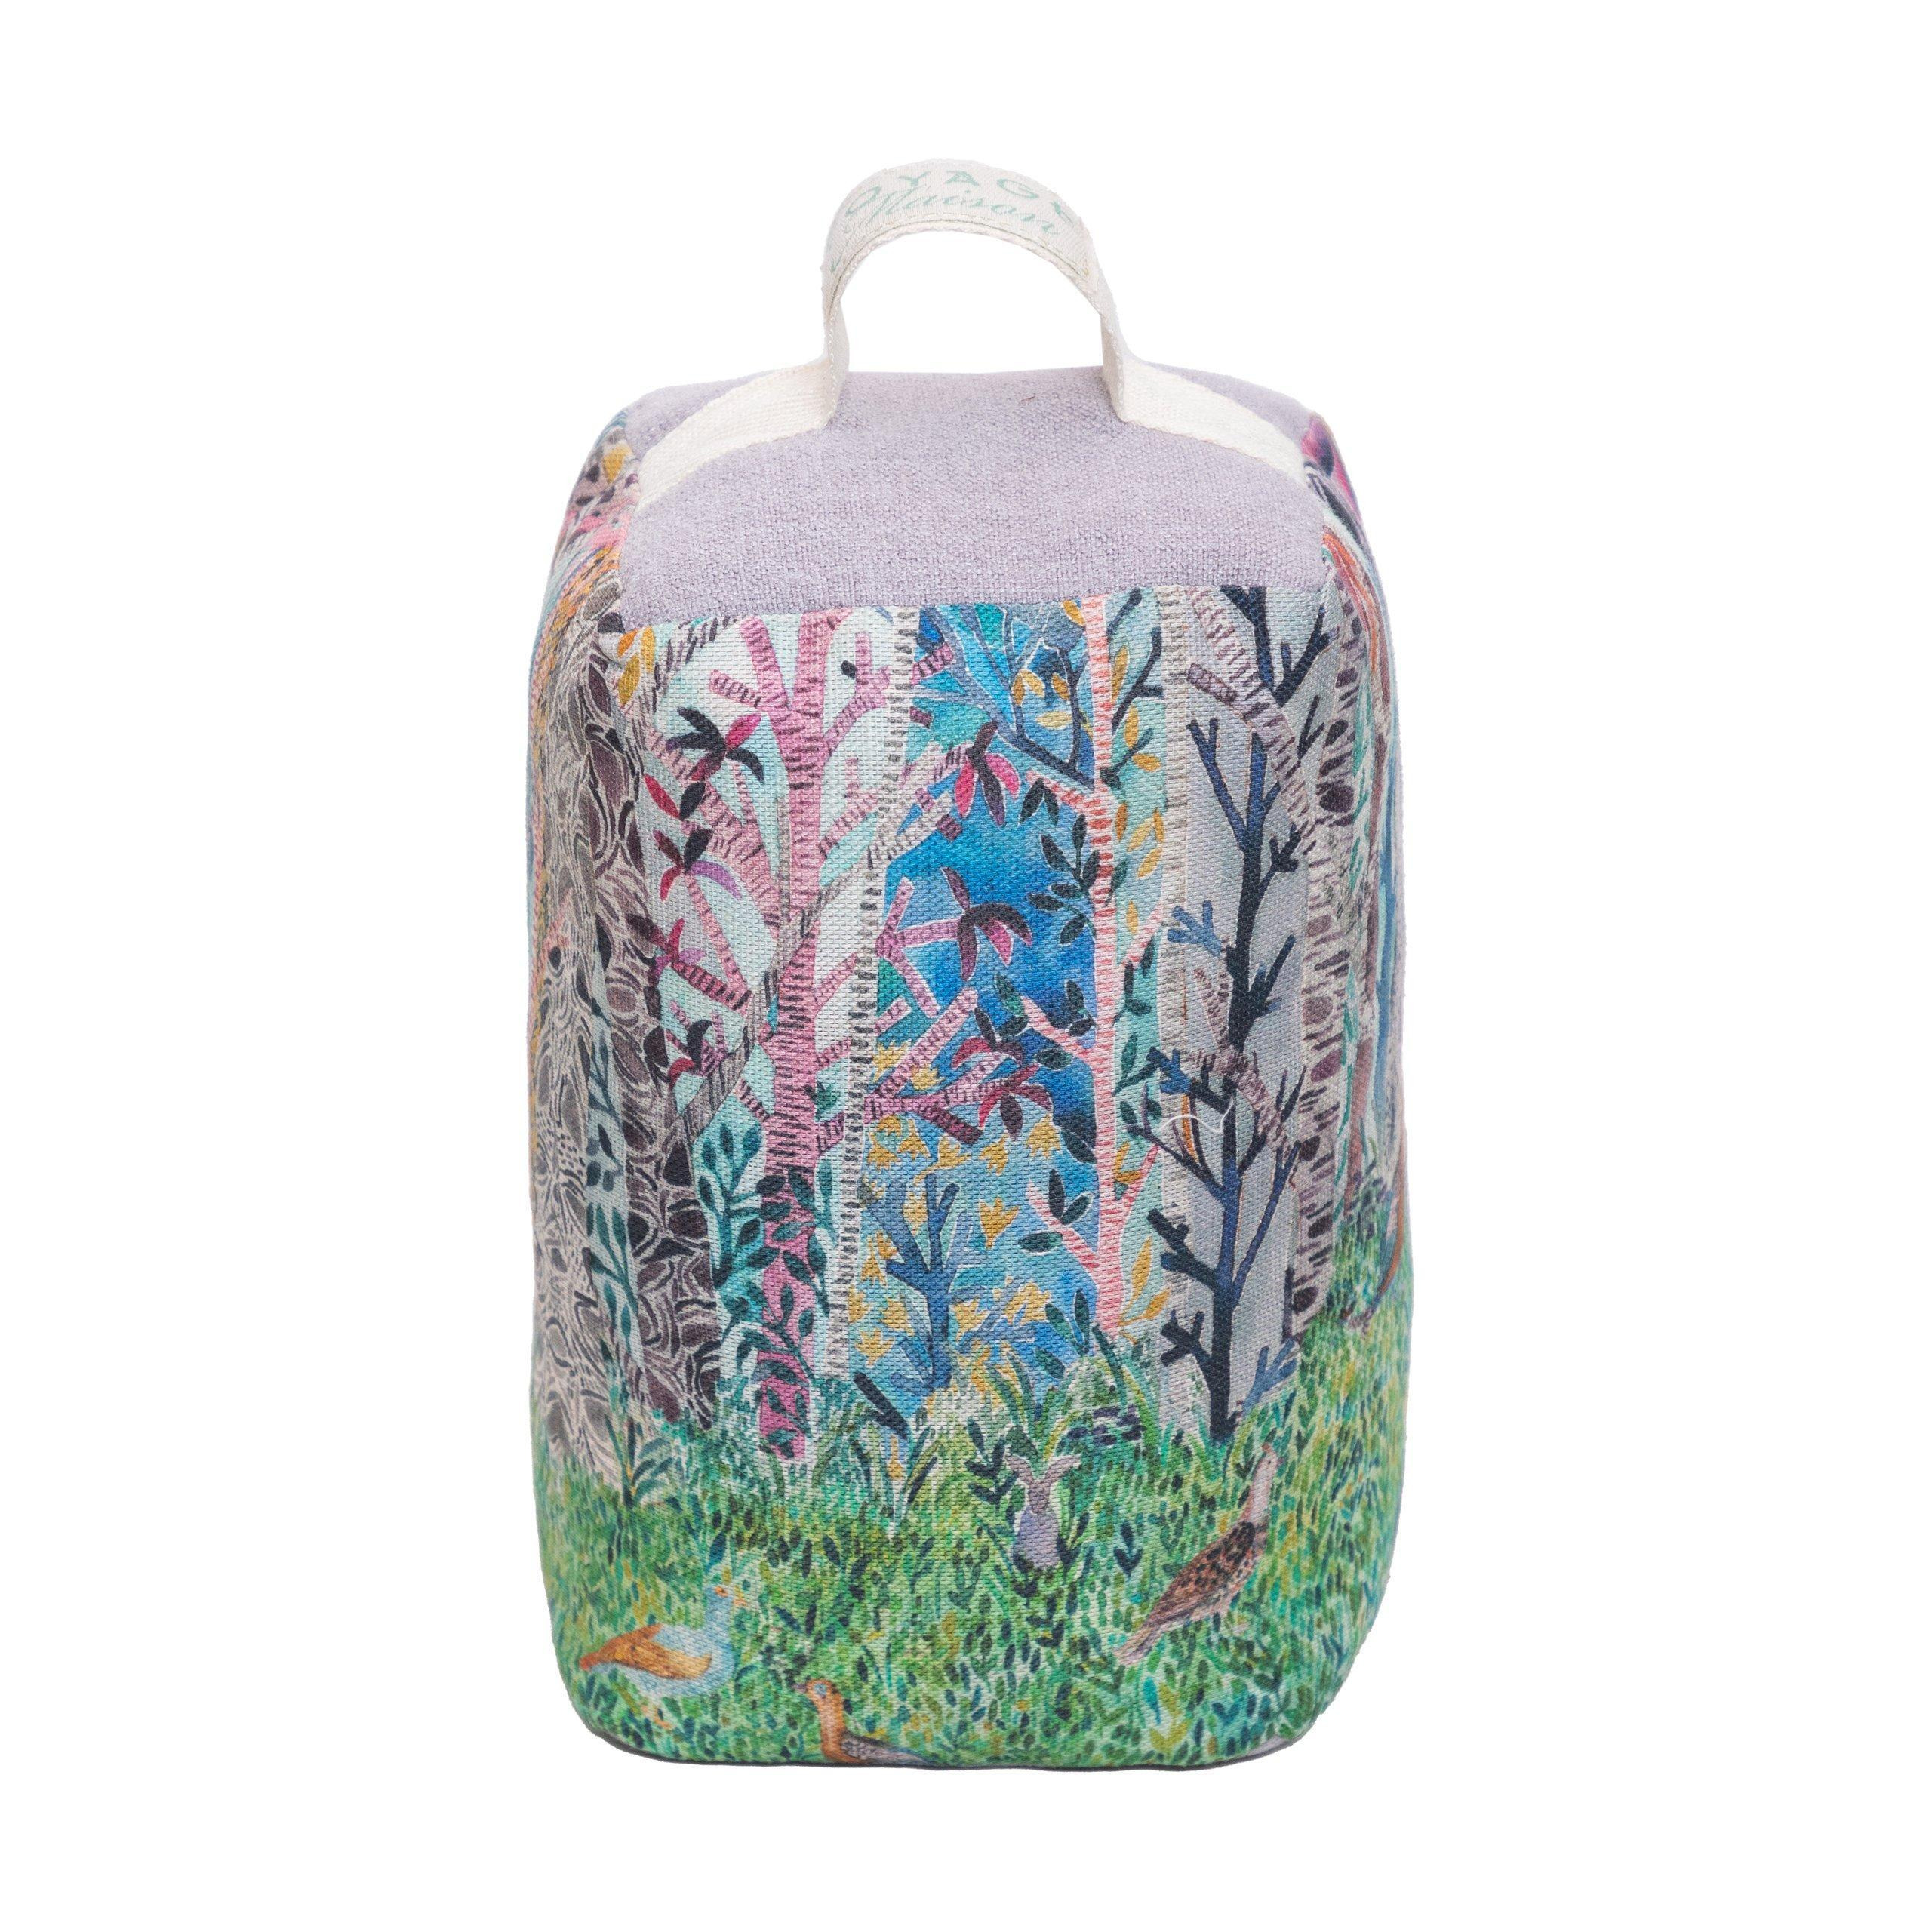 Whimsical Tale Woodland Lavender & Wheat Filled Doorstop - image 1